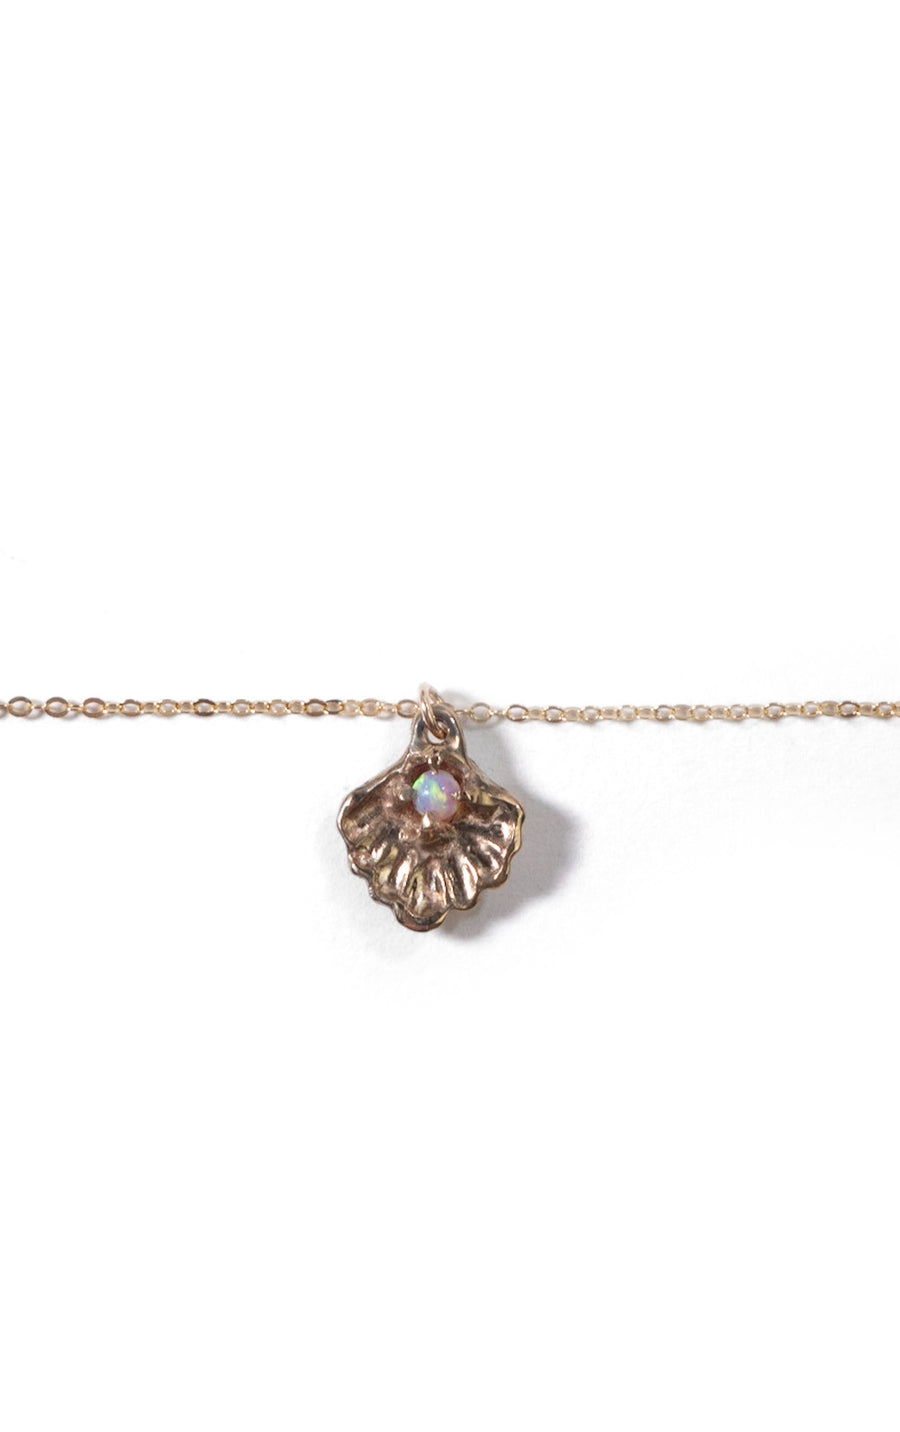 Bronze & Opal Seashell Necklace by Iron Oxide